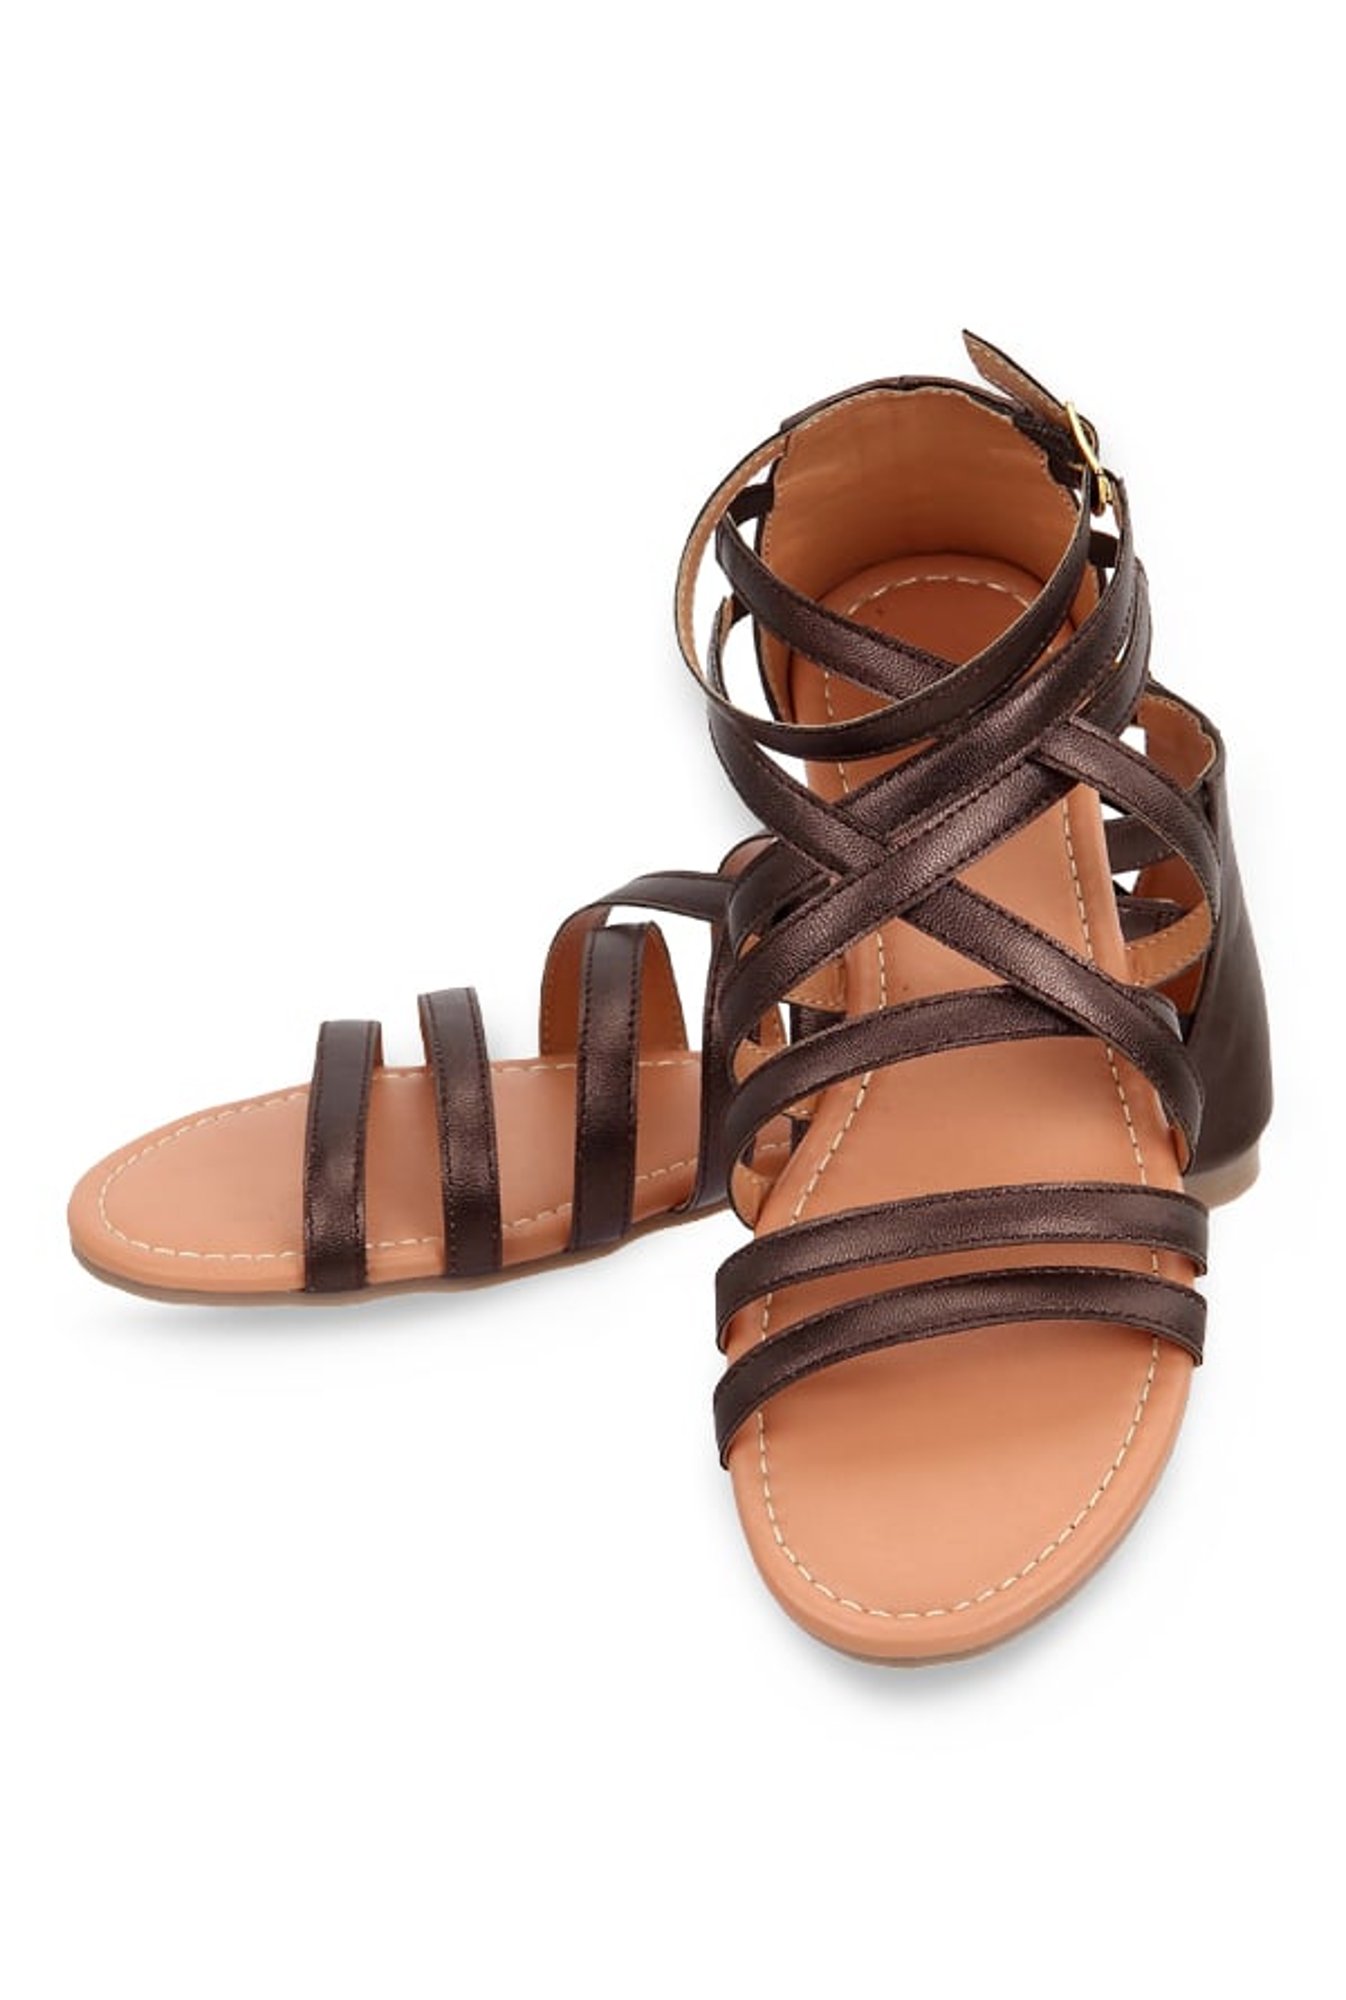 ROAN - Bee Women's Sandals - Leather Dress India | Ubuy